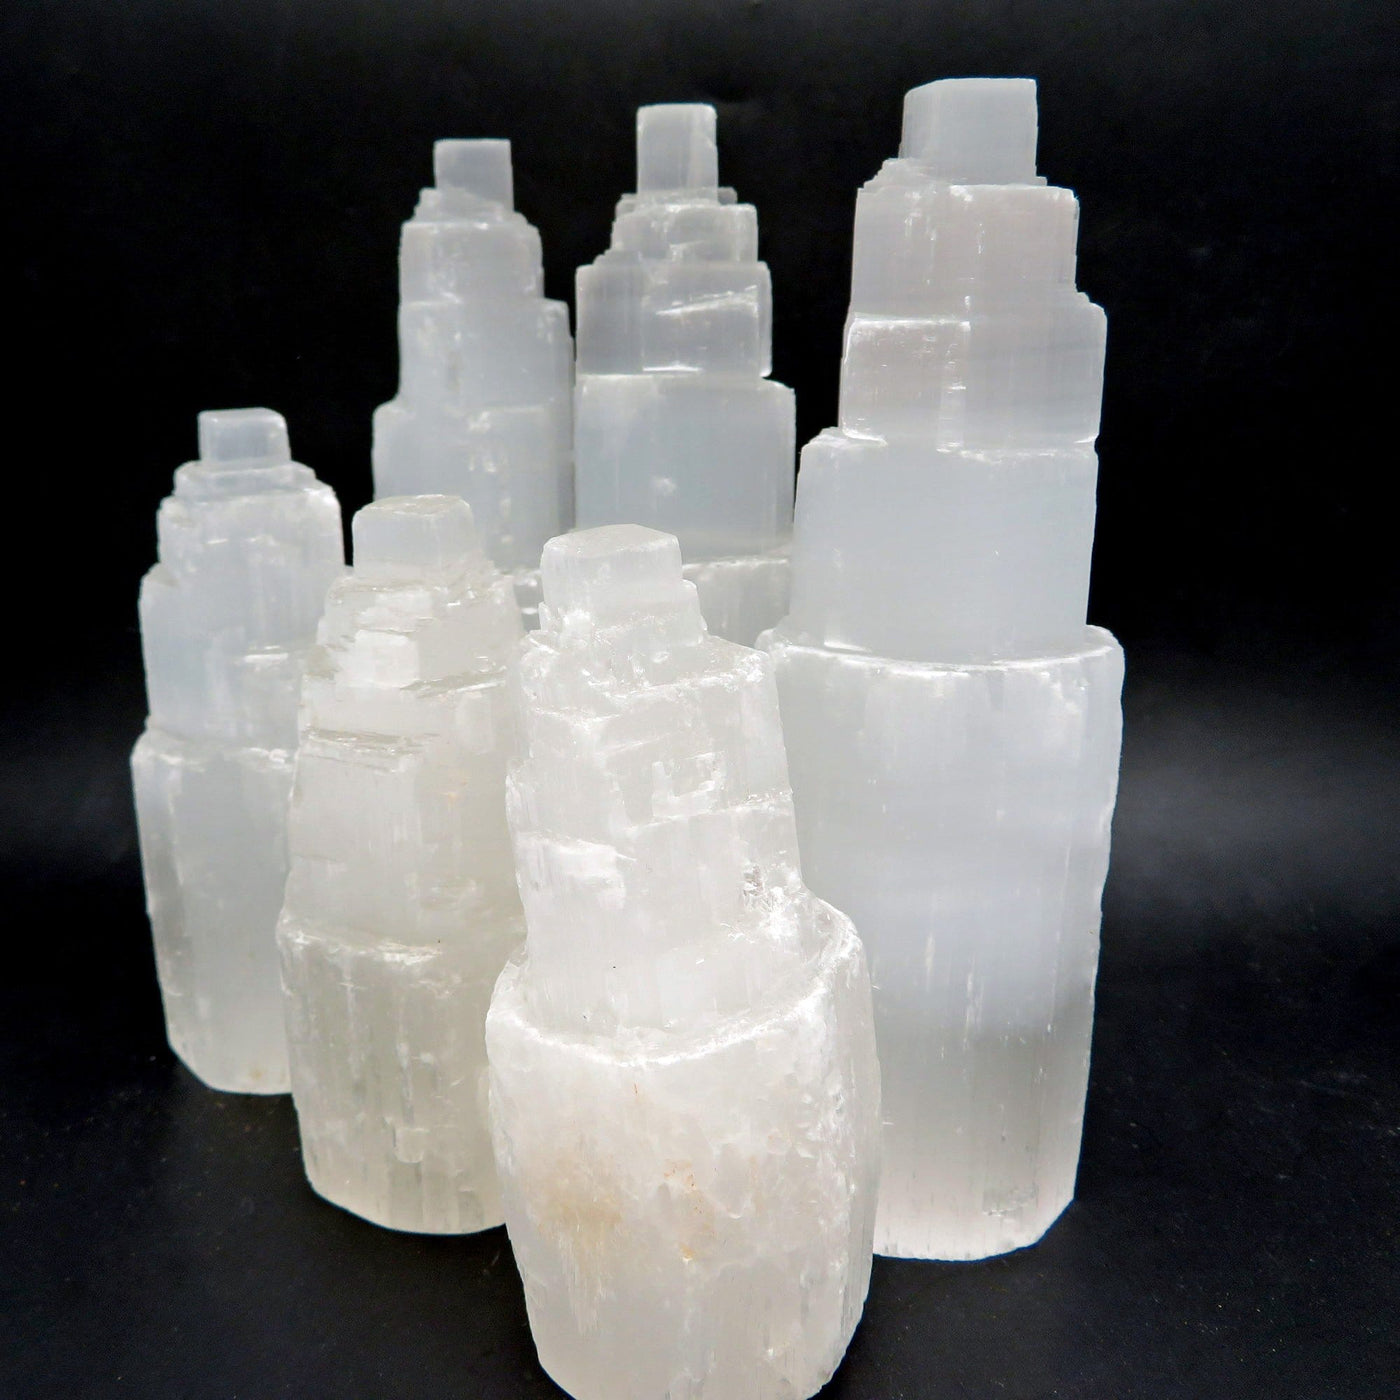 6 assorted selenite towers on a black background